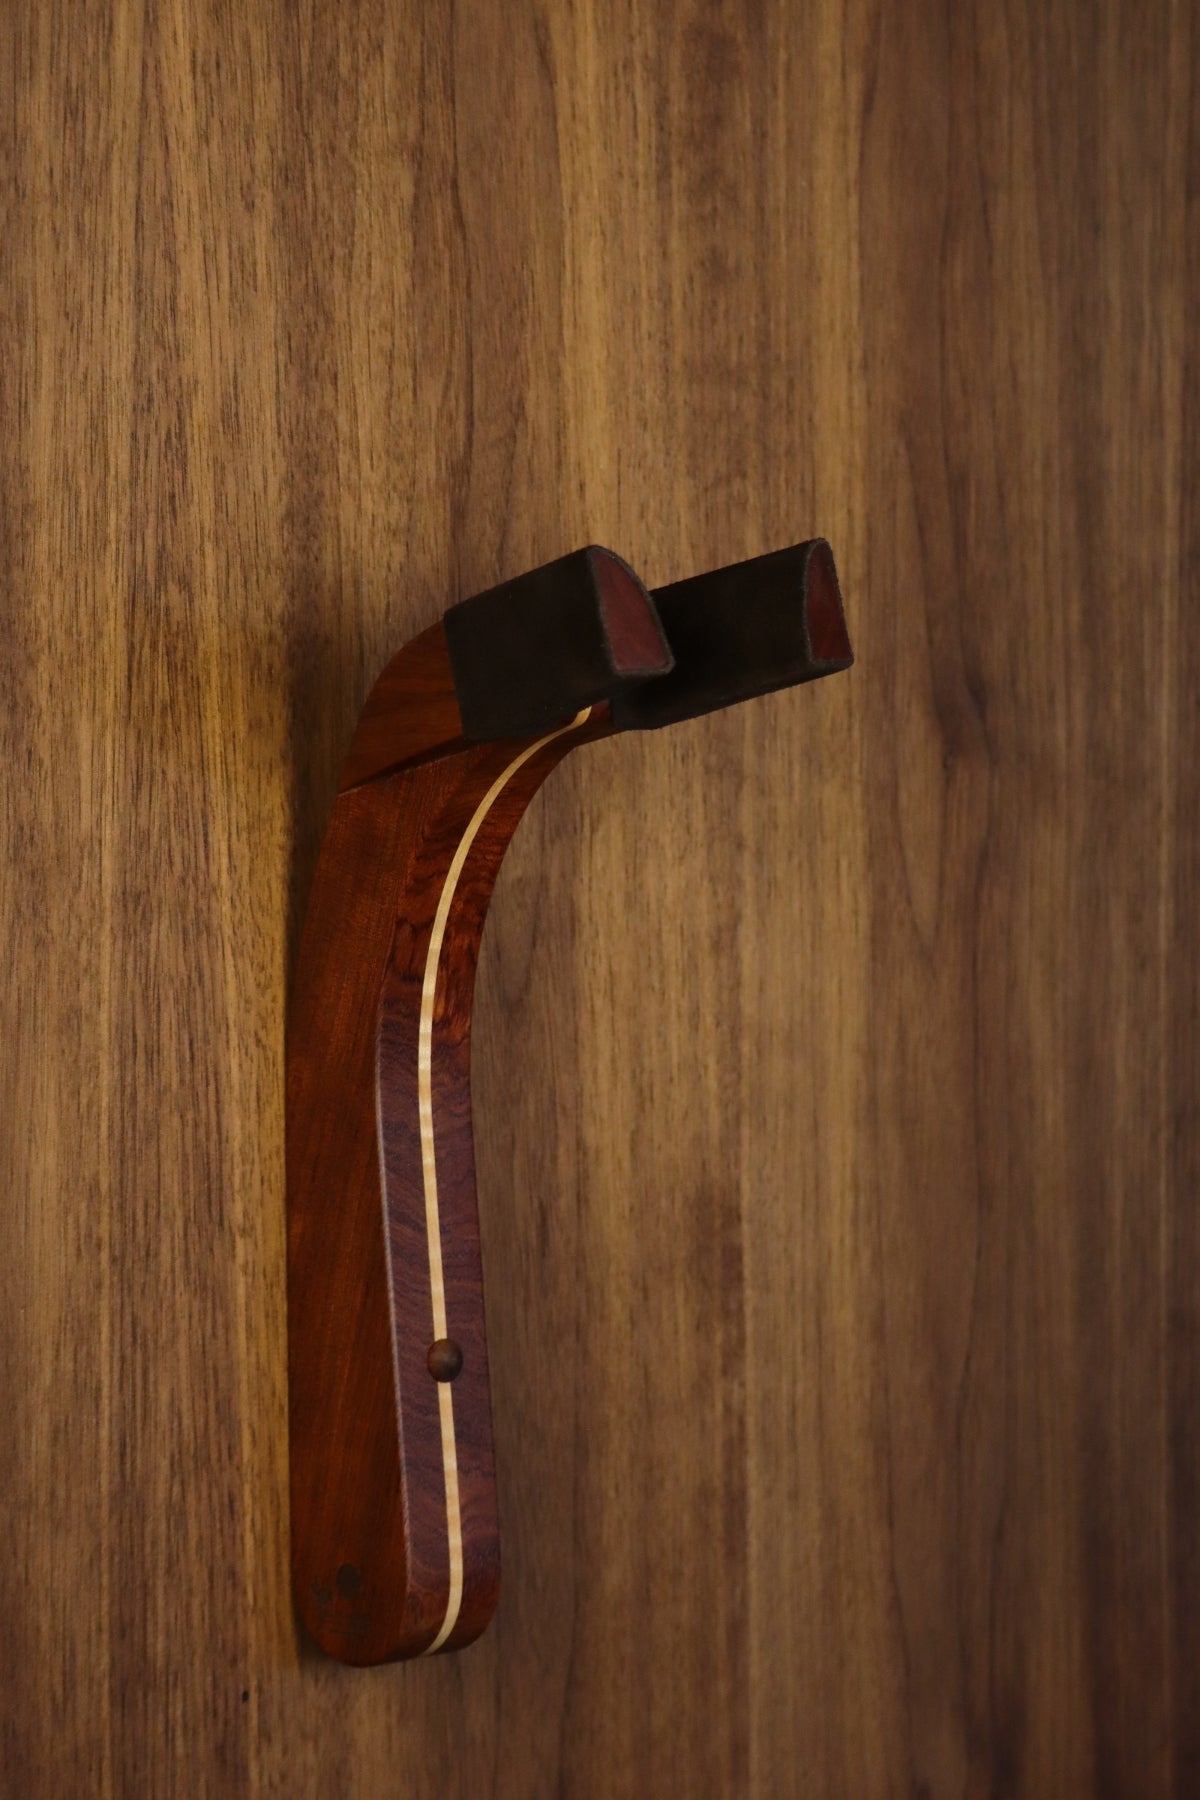 Bubinga rosewood and curly maple wood guitar wall mount hanger installed on paneled wall